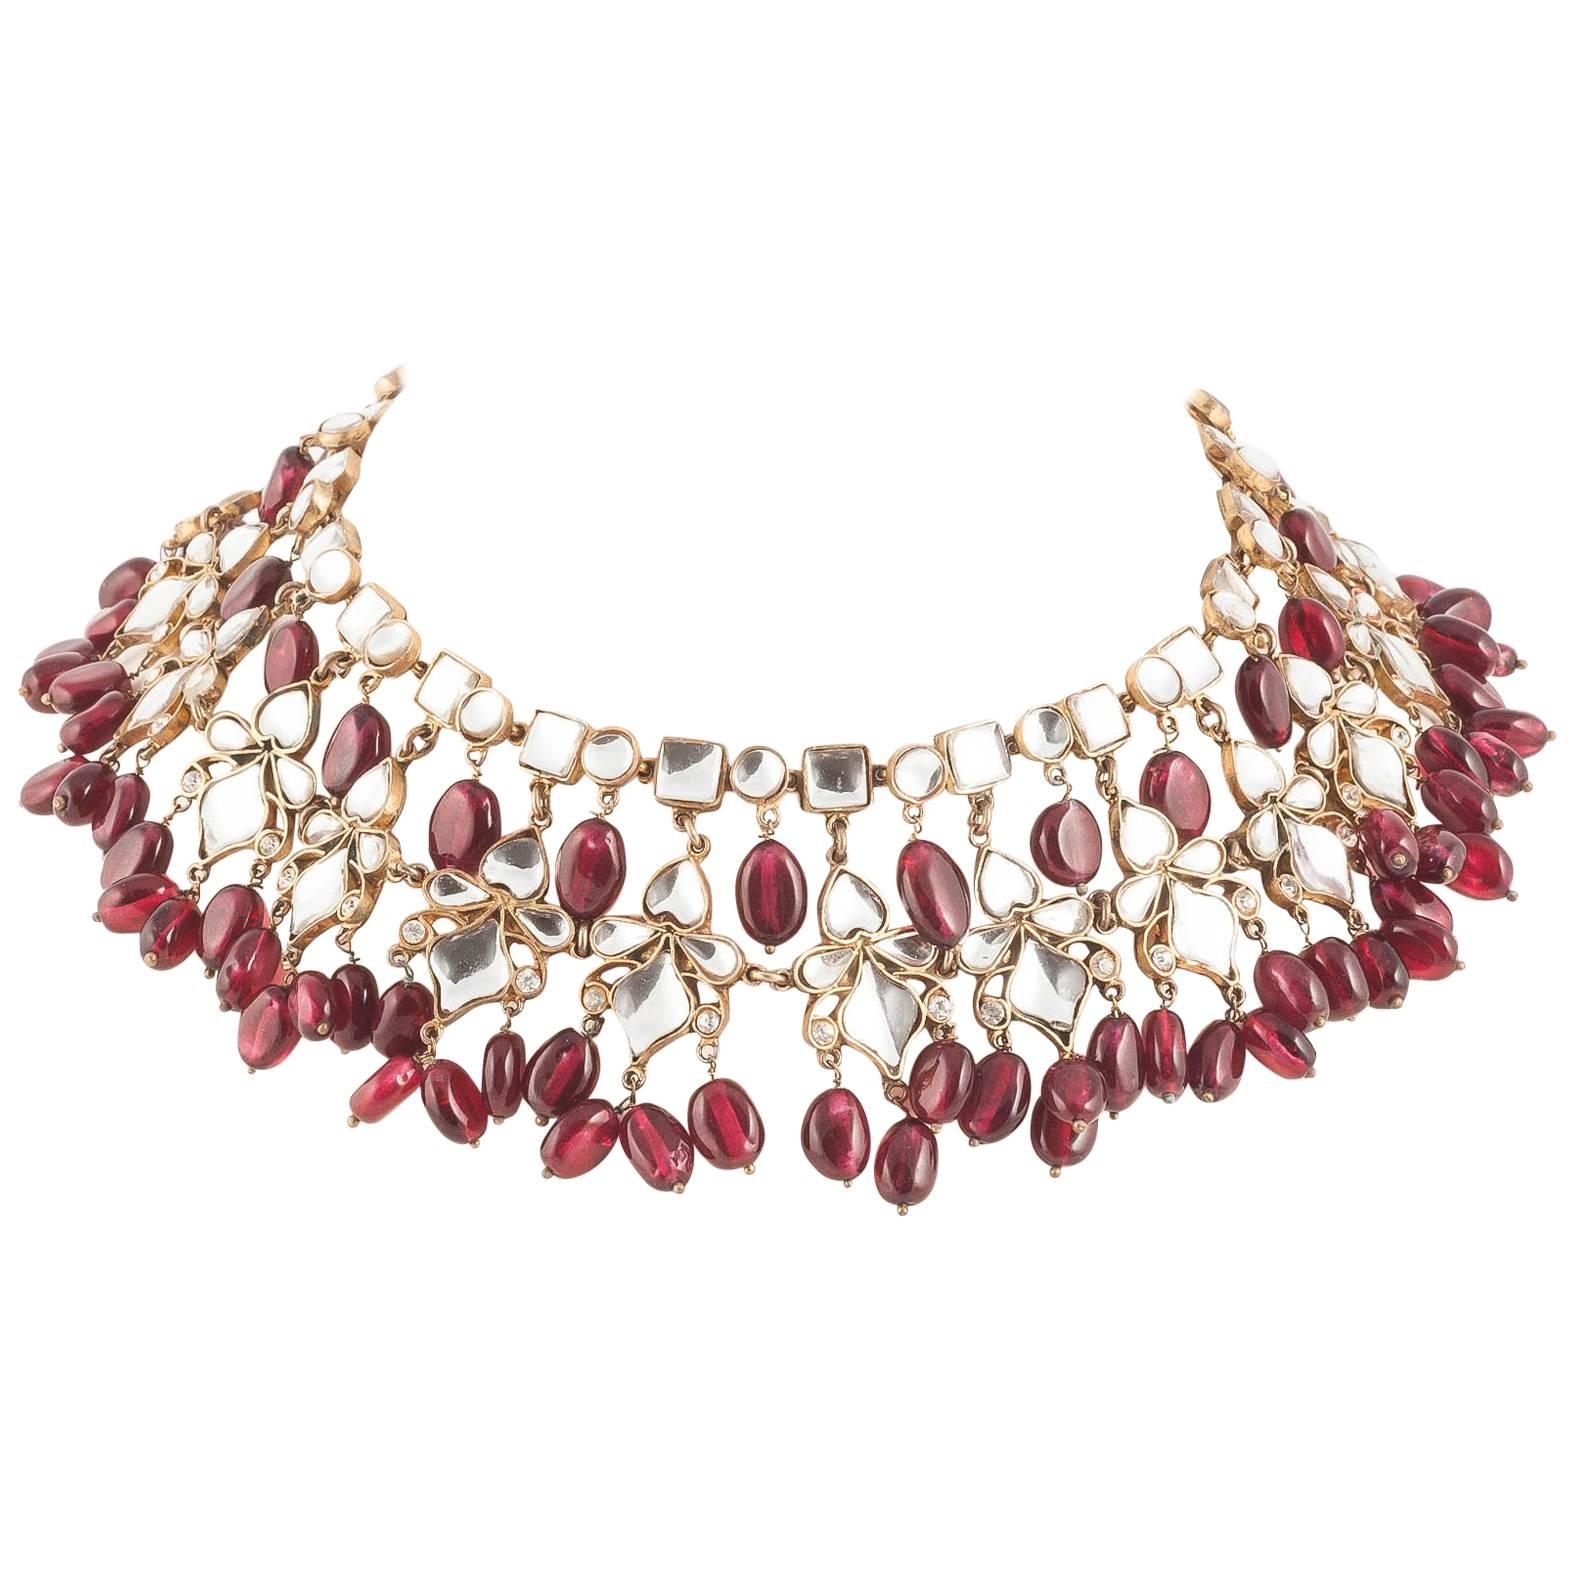 Kenneth Jay Lane Moghul style necklace, 1960s